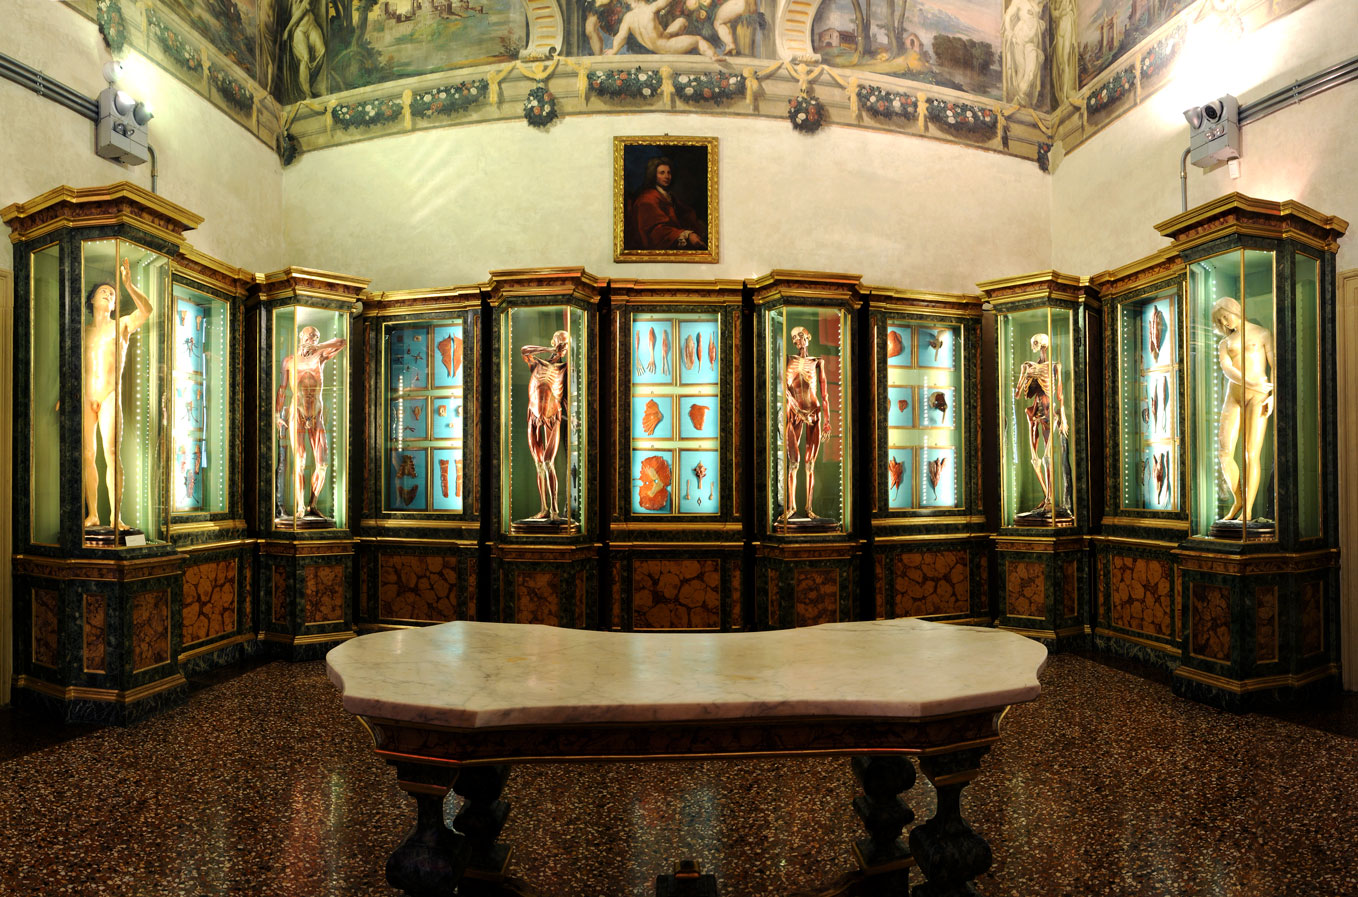 The anatomy room, with figures by Ercole Lelli, in the Palazzo Poggi, Bologna